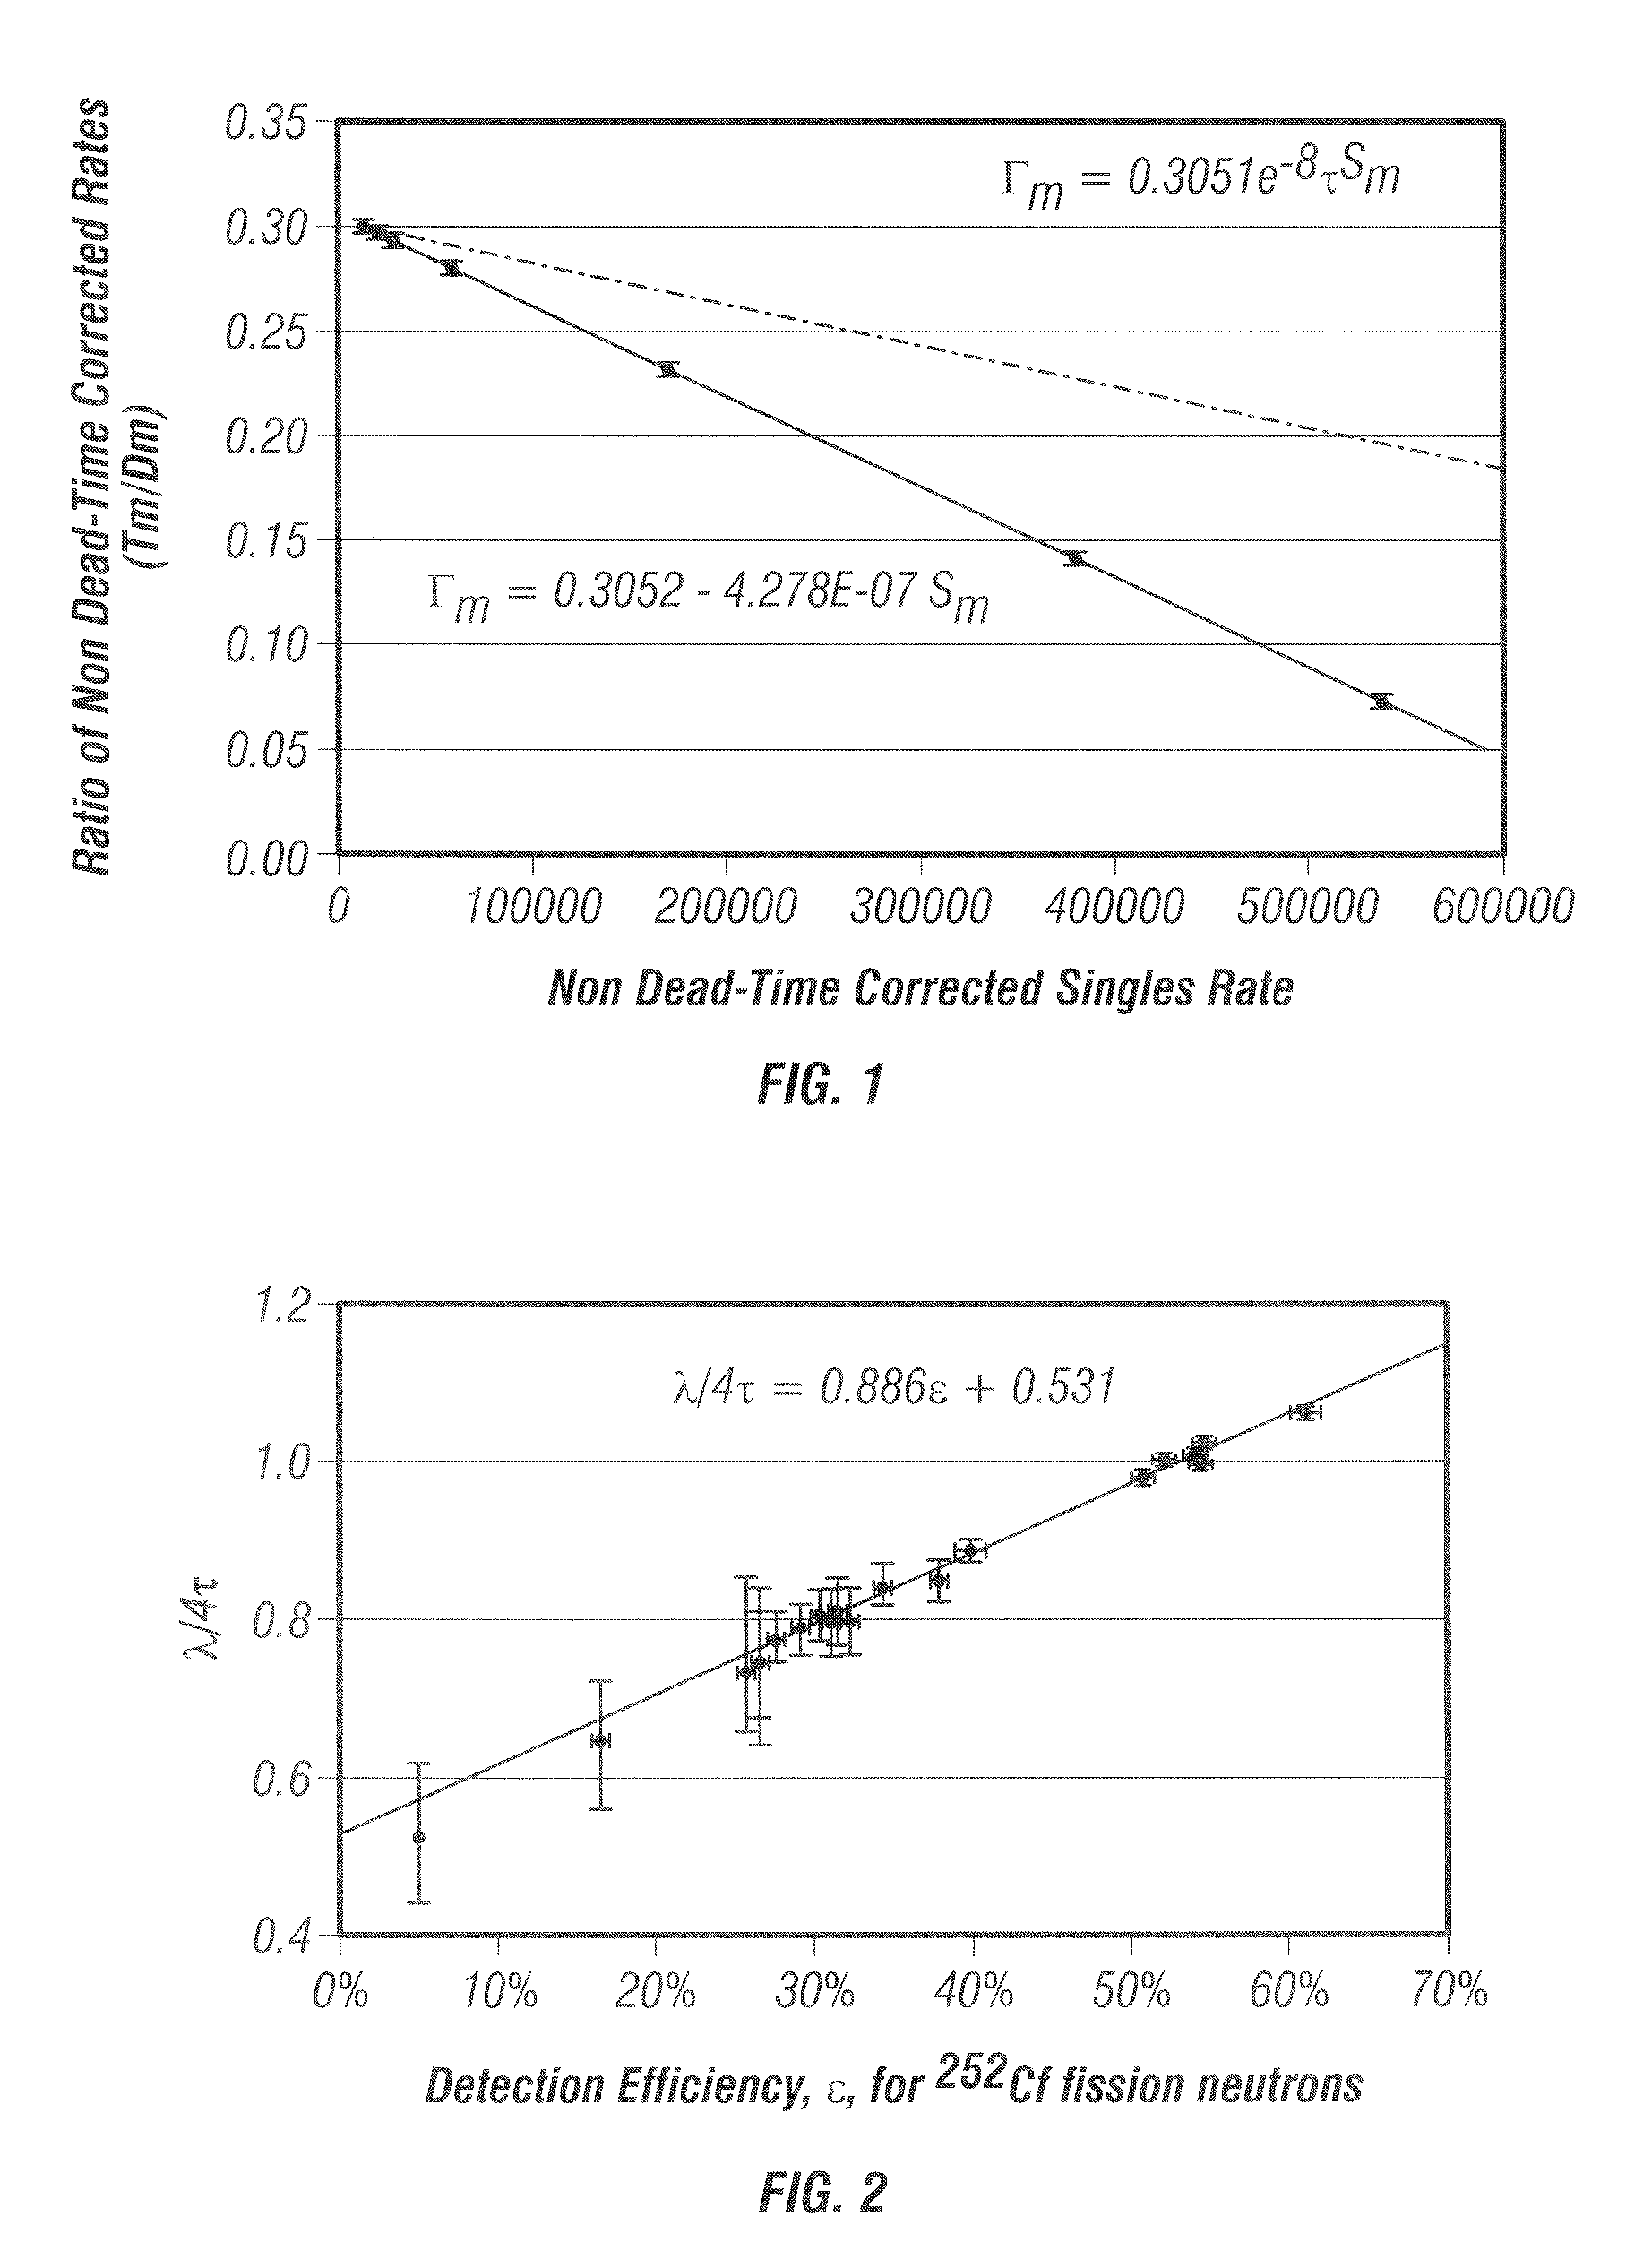 Method for the determination of the neutron multiplicity counter dead time parameter